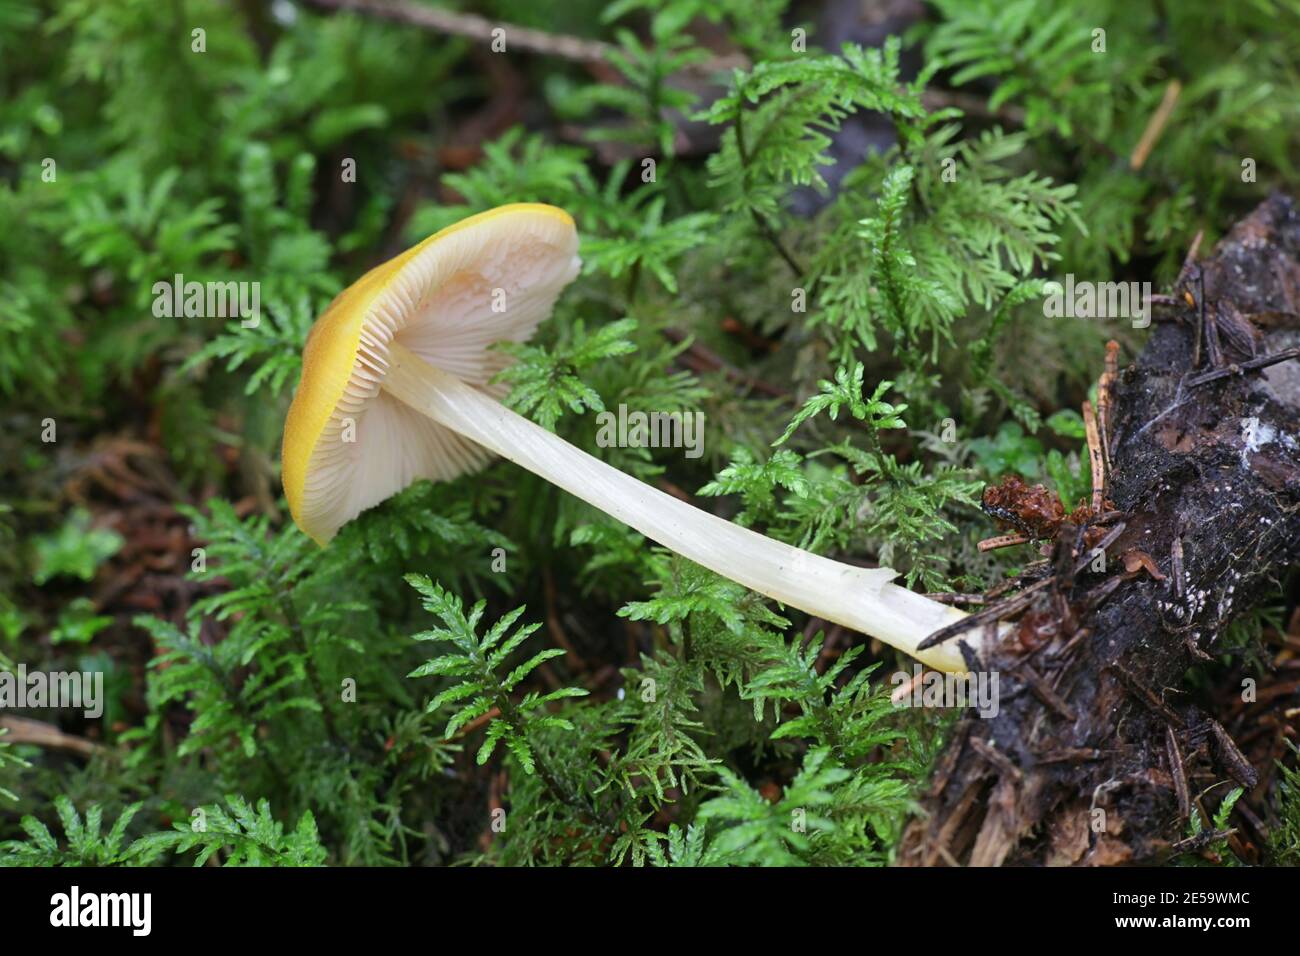 Pluteus leoninus, known as the lion shield, wild mushroom from Finland Stock Photo